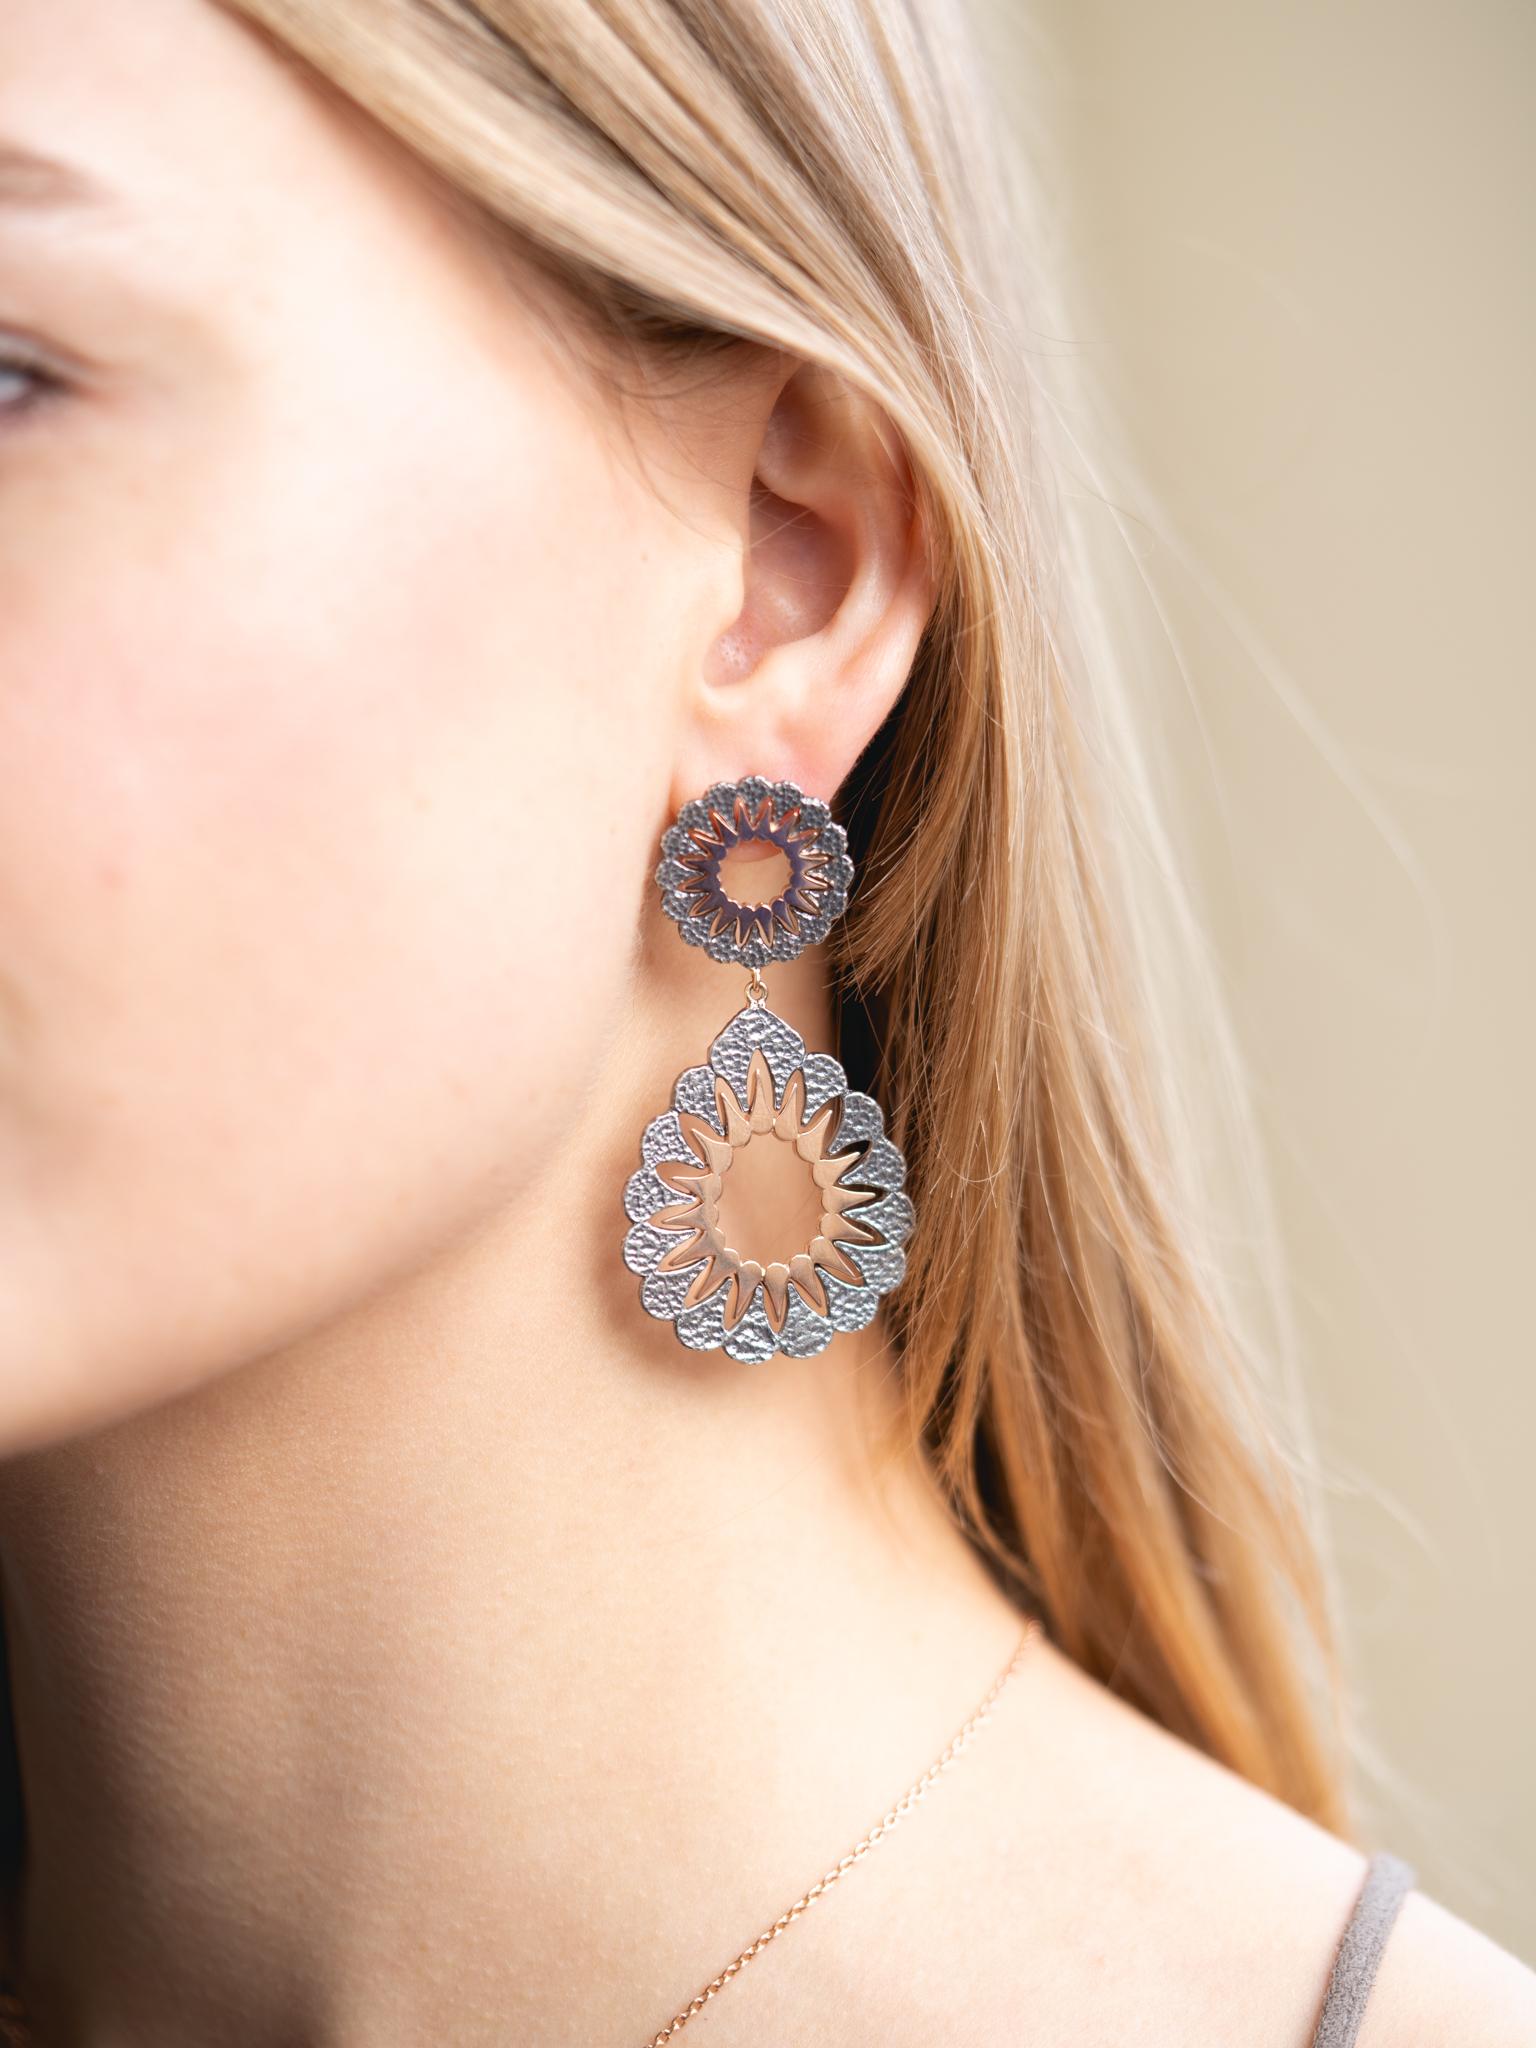 rose gold statement earrings